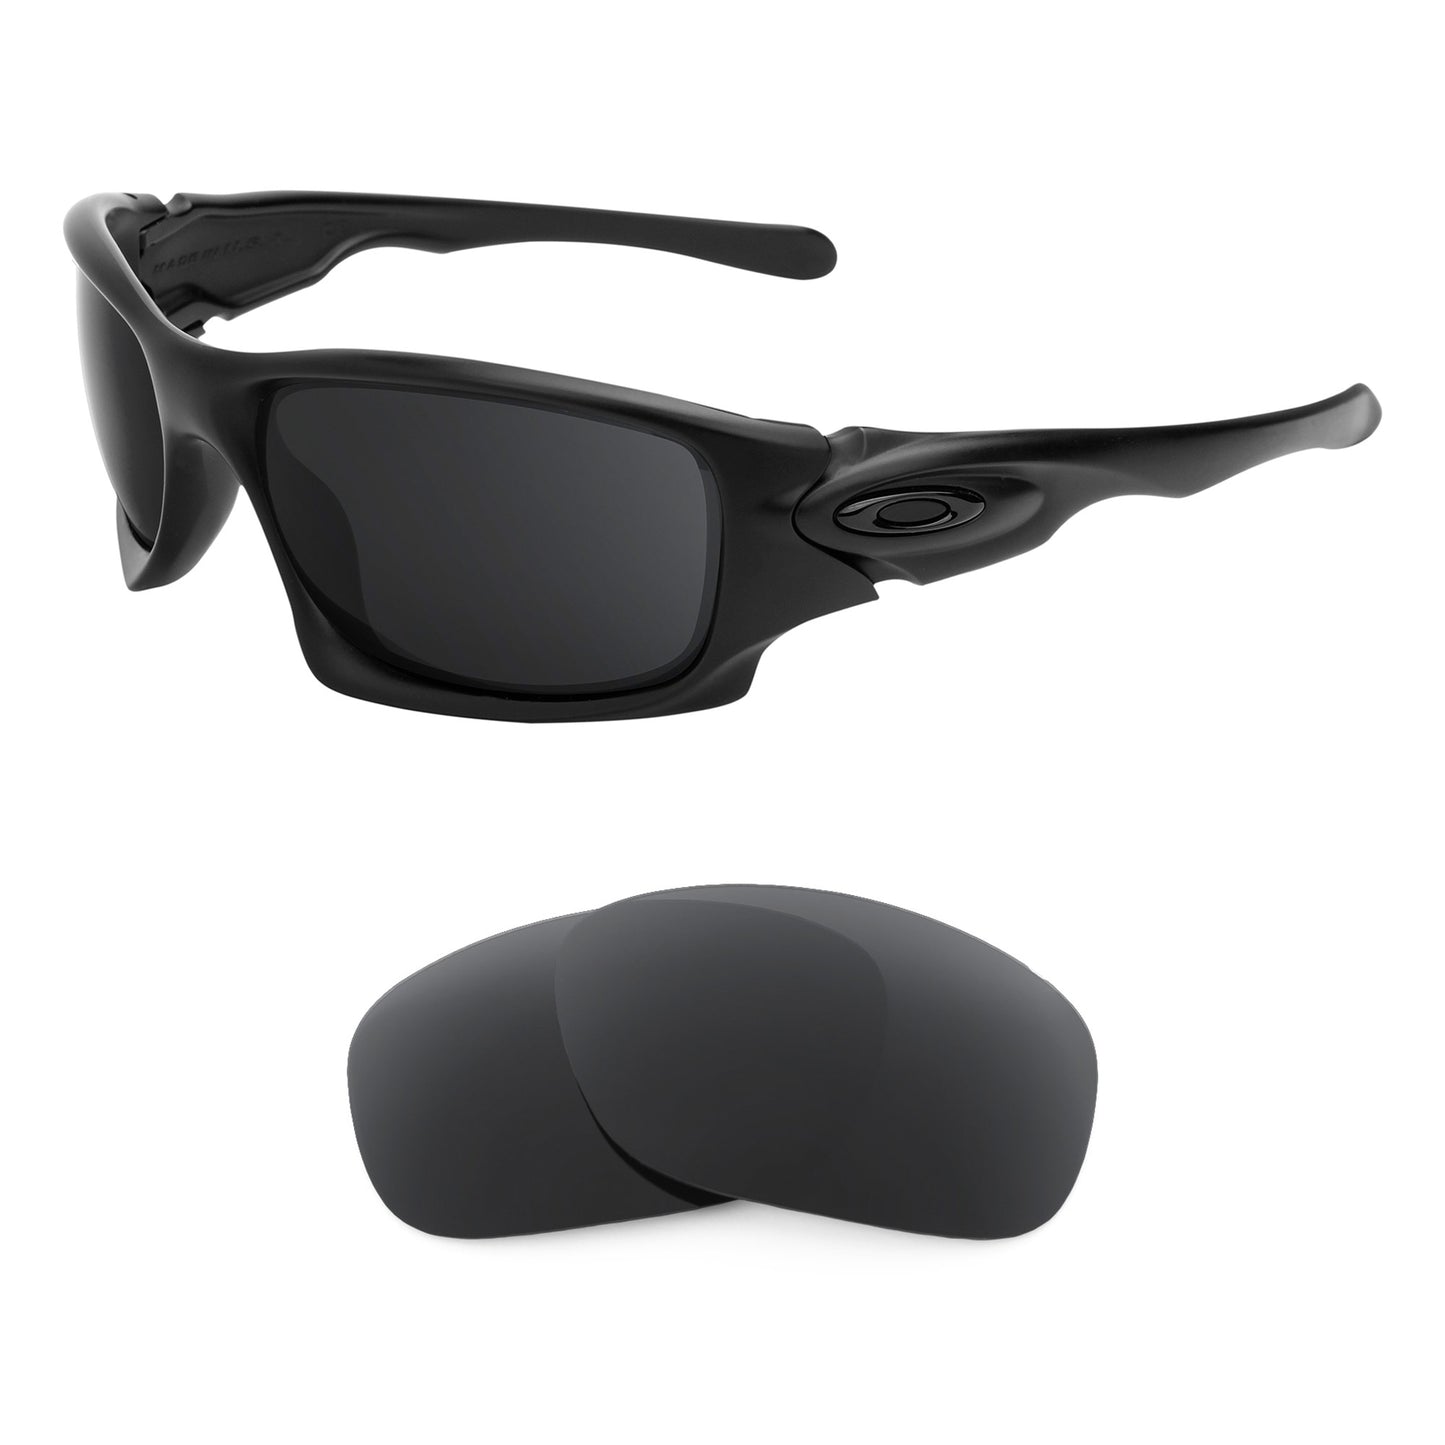 Oakley Ten sunglasses with replacement lenses